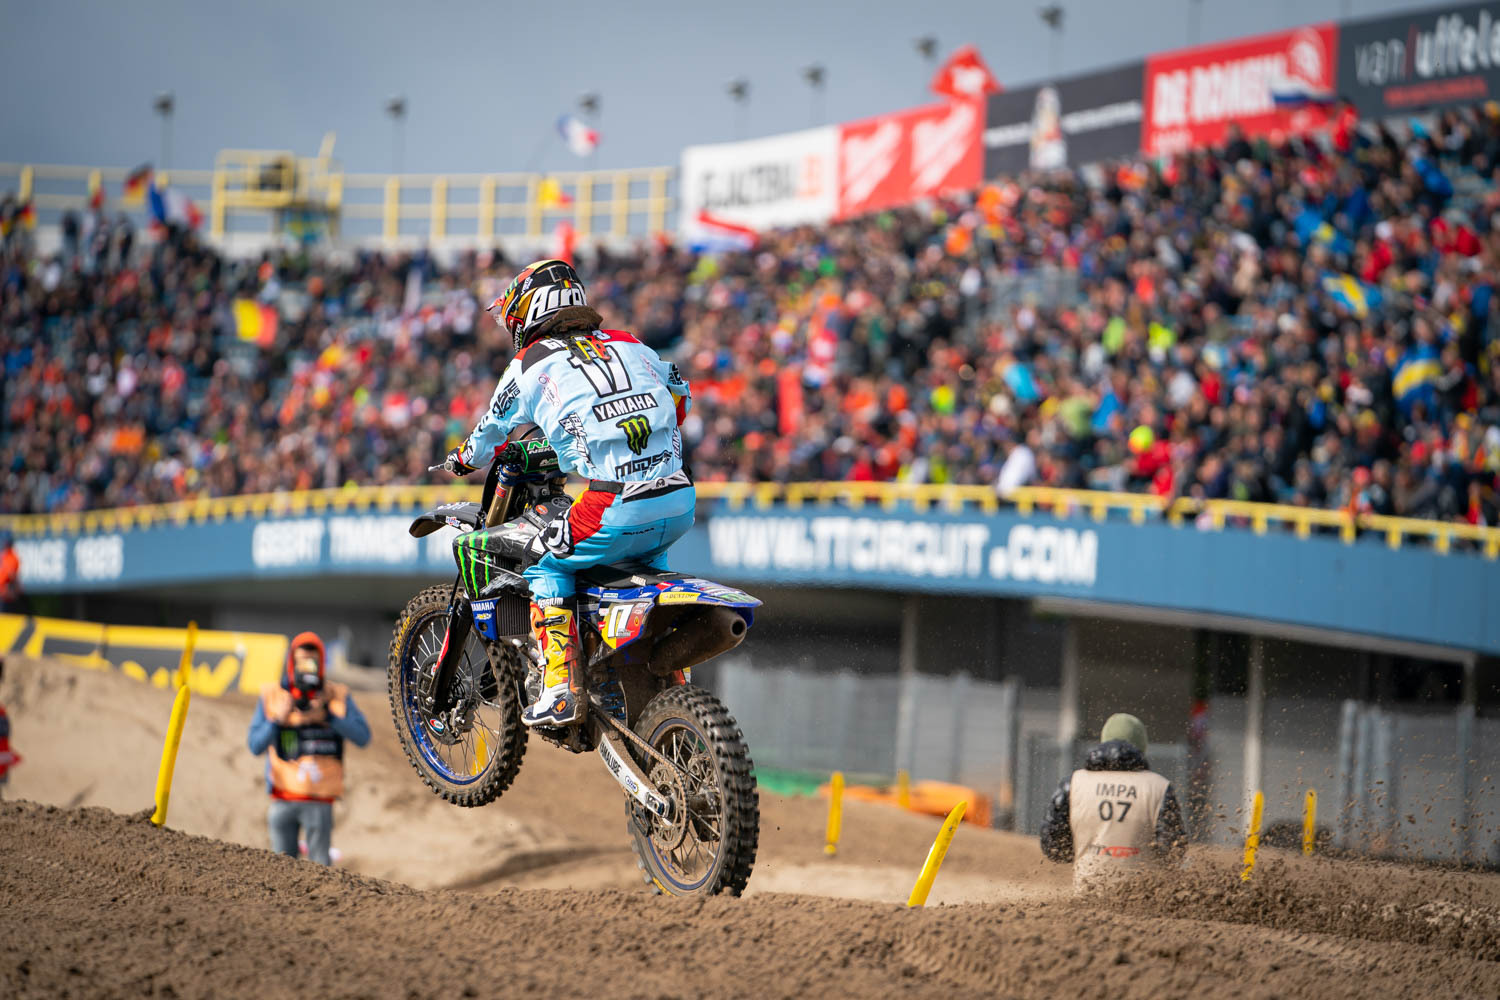 2020 Motocross Of Nations Canceled